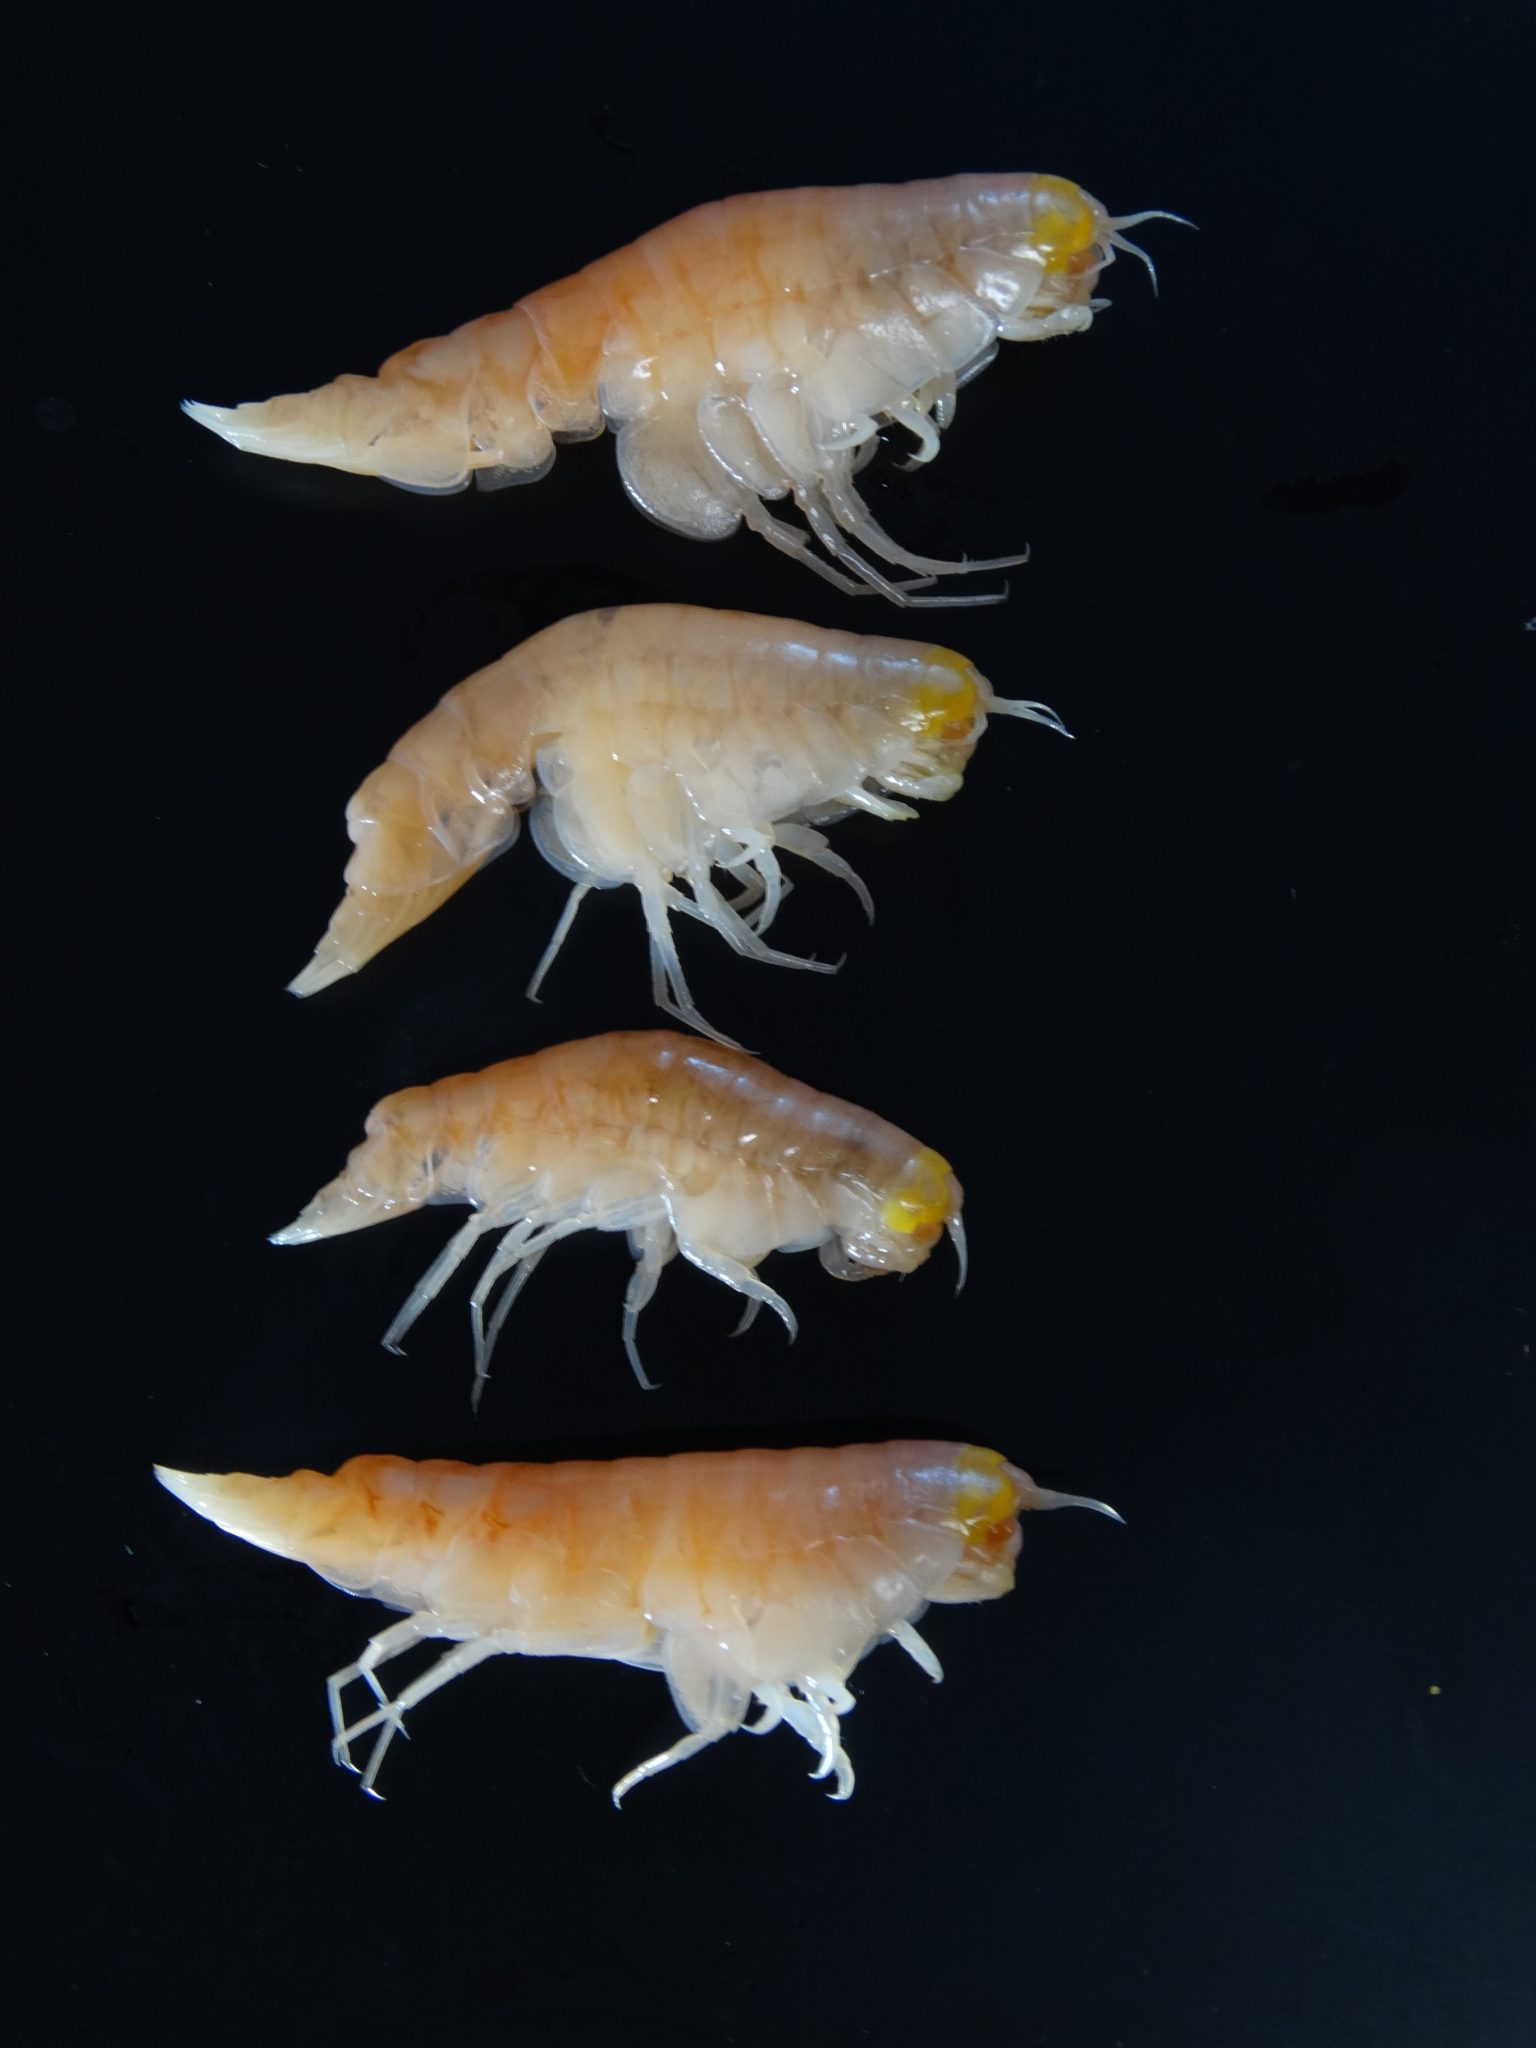 A handout photo released on February 9, 2017 by Nature shows ultra-deepwater amphipod Hirondellea gigas from the deepest depths of the Mariana Trench in the Northwest Pacific Ocean. This species is known to inhabit depths of 6000 to nearly 11,000m. Banned chemicals are tainting tiny crustaceans that inhabit the deepest ocean, a study said on February 13, 2017 -- the first evidence that humans are polluting even the farthest reaches of our planet. Even at depths of nearly 11 kilometres (seven miles) these scavengers could not escape "extraordinary" levels of contamination with chemicals used in coolants and insulating fluids, researchers said.  / AFP PHOTO / NATURE PUBLISHING GROUP / Dr. Alan JAMIESON / RESTRICTED TO EDITORIAL USE - MANDATORY CREDIT "AFP PHOTO / NATURE / DR. ALAN JAMIESON / NEWCASTLE UNIVERSITY" - NO MARKETING NO ADVERTISING CAMPAIGNS - DISTRIBUTED AS A SERVICE TO CLIENTS - TO GO WITH AFP STORY BY MARIETTE LE ROUX